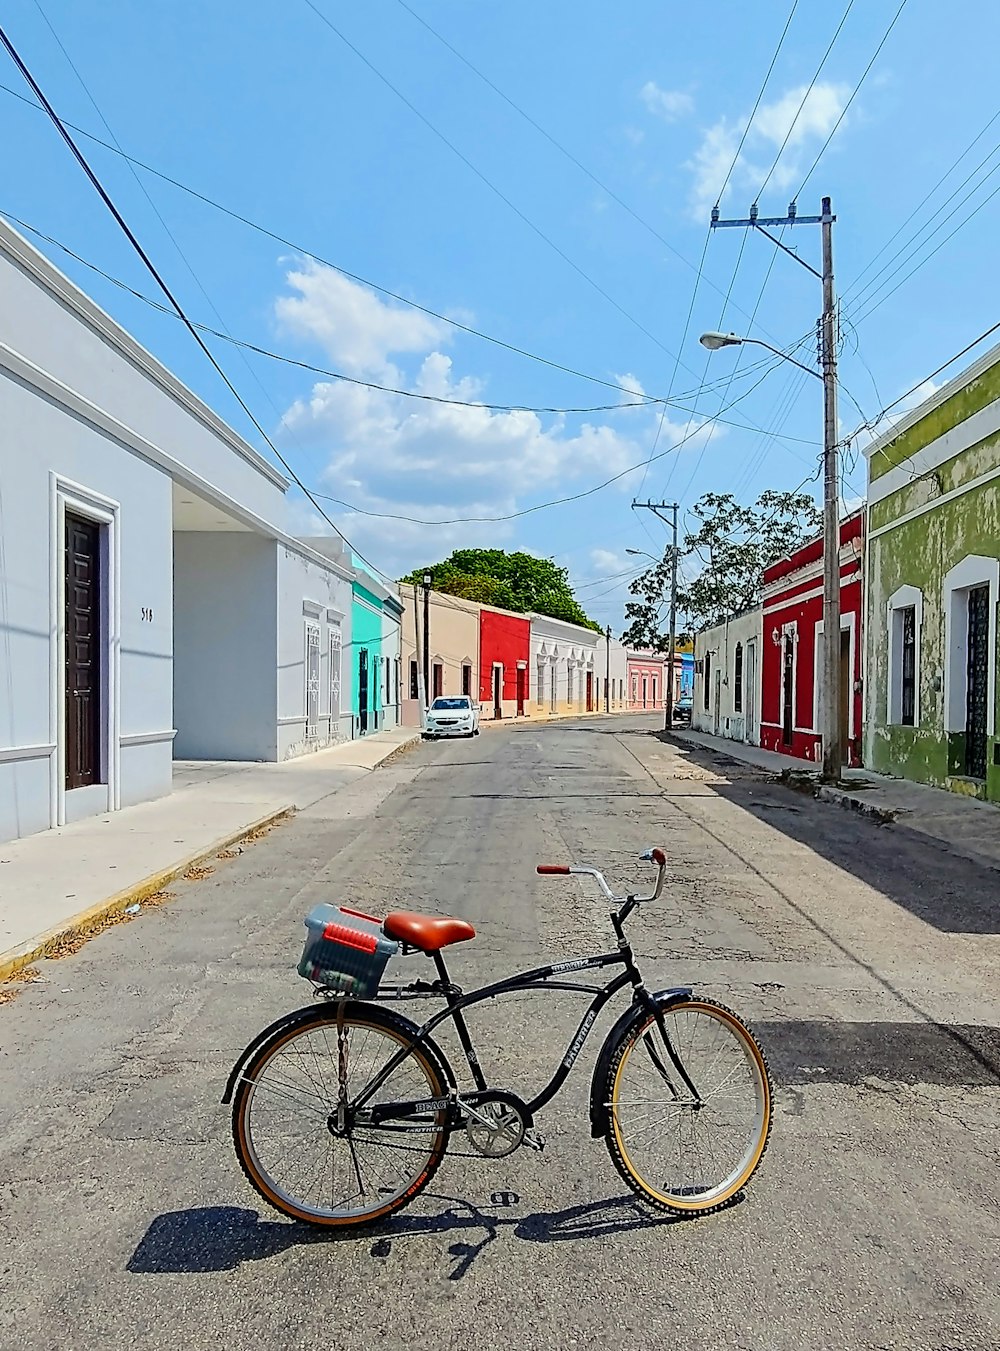 black city bike parked beside red and white concrete building during daytime